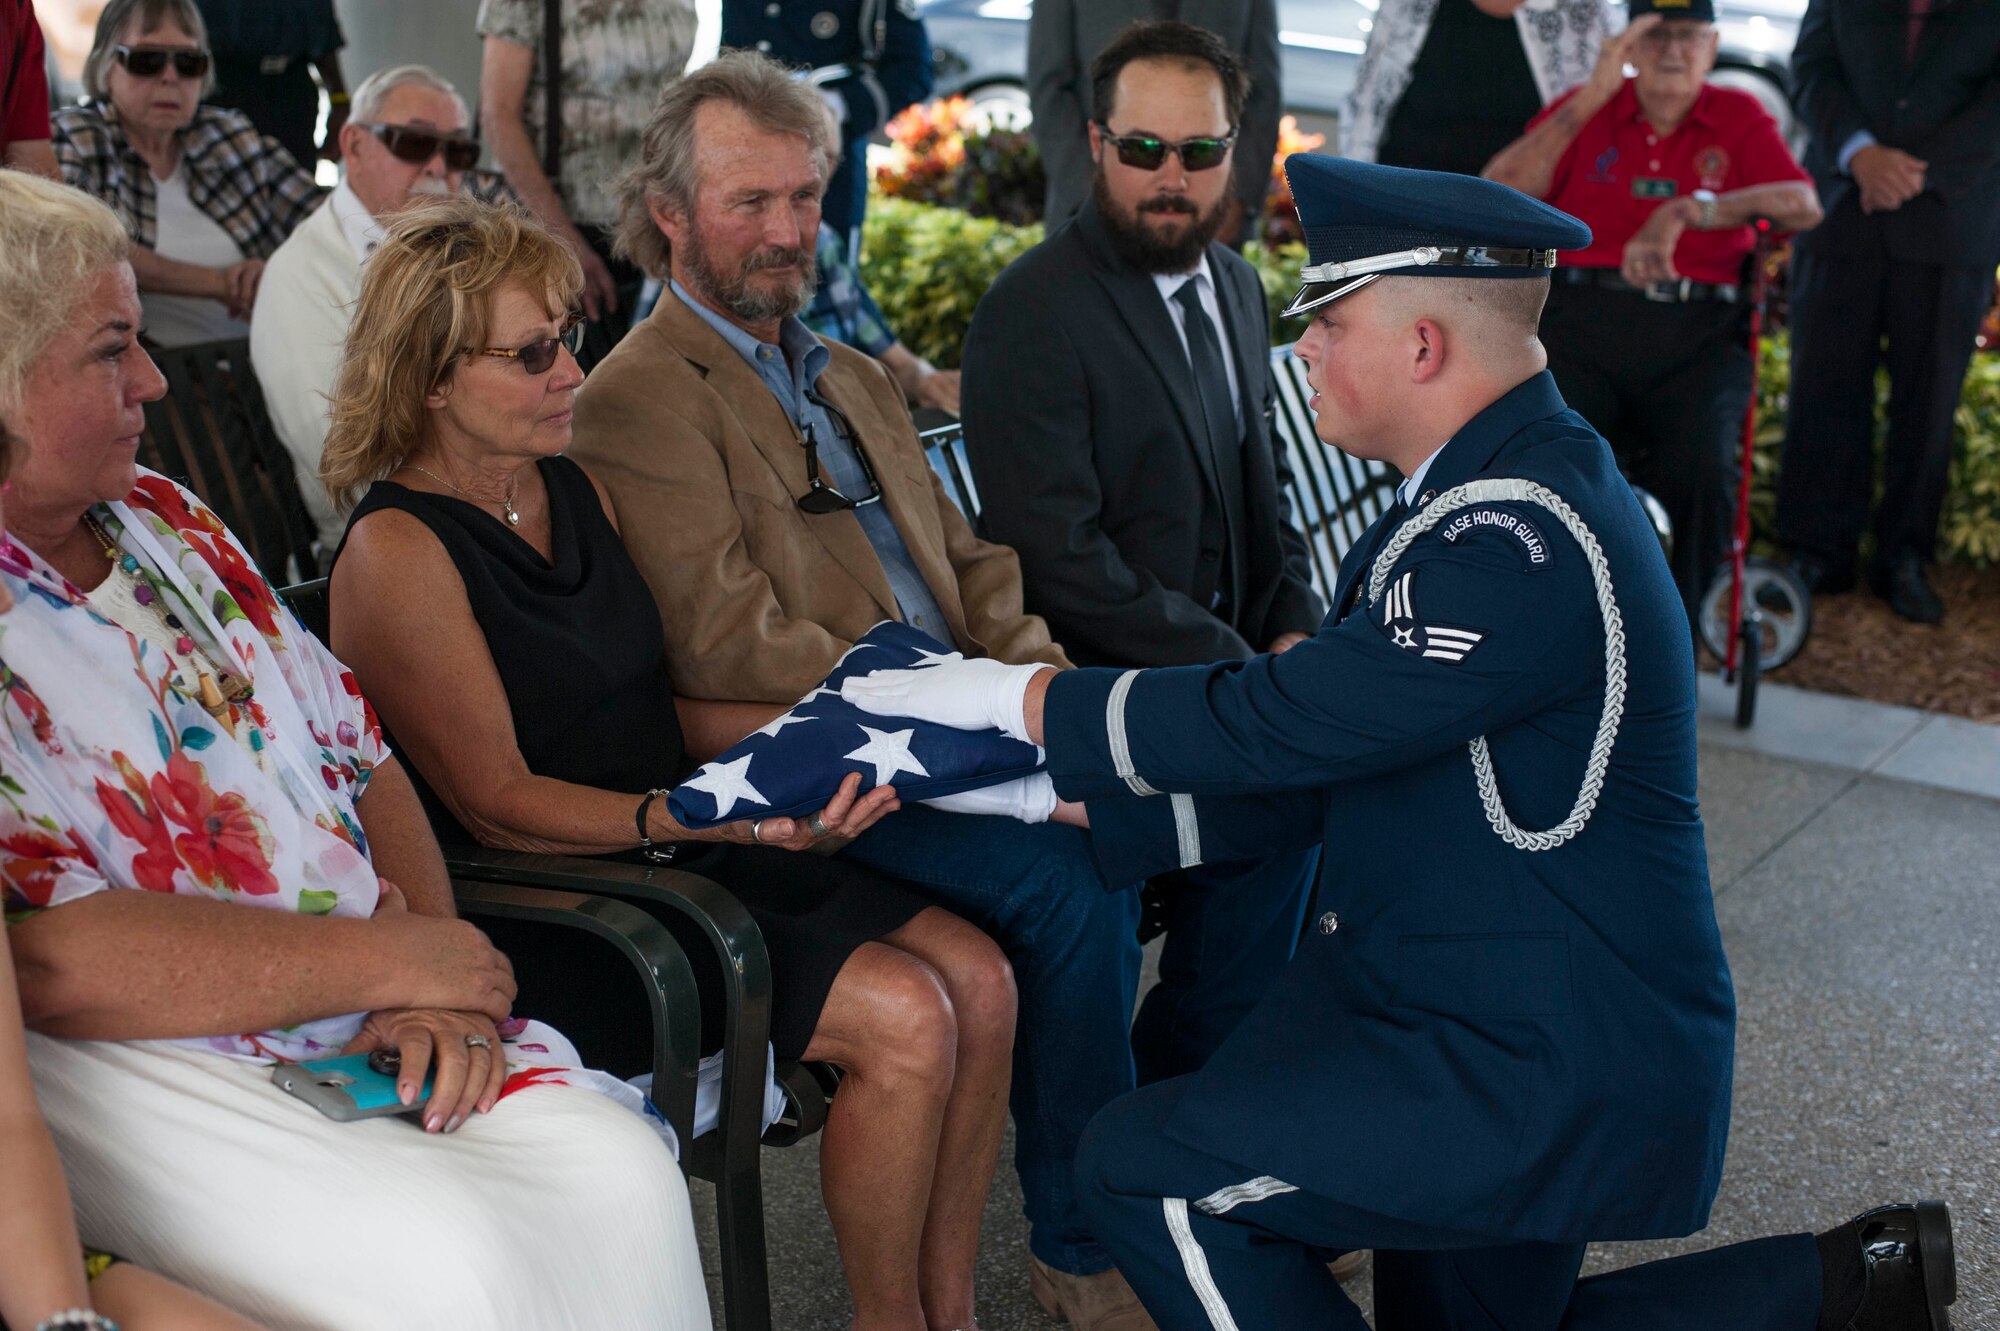 U.S. Air Force Senior Airman Hunter Fennell, a MacDill Air Force Base honor guardsman presents a folder U.S. flag to Cathy Haun, the daughter of Tech. Sgt. Earl W. Haun during his military funeral service at the Sarasota National Cemetery, Oct. 2, 2018.